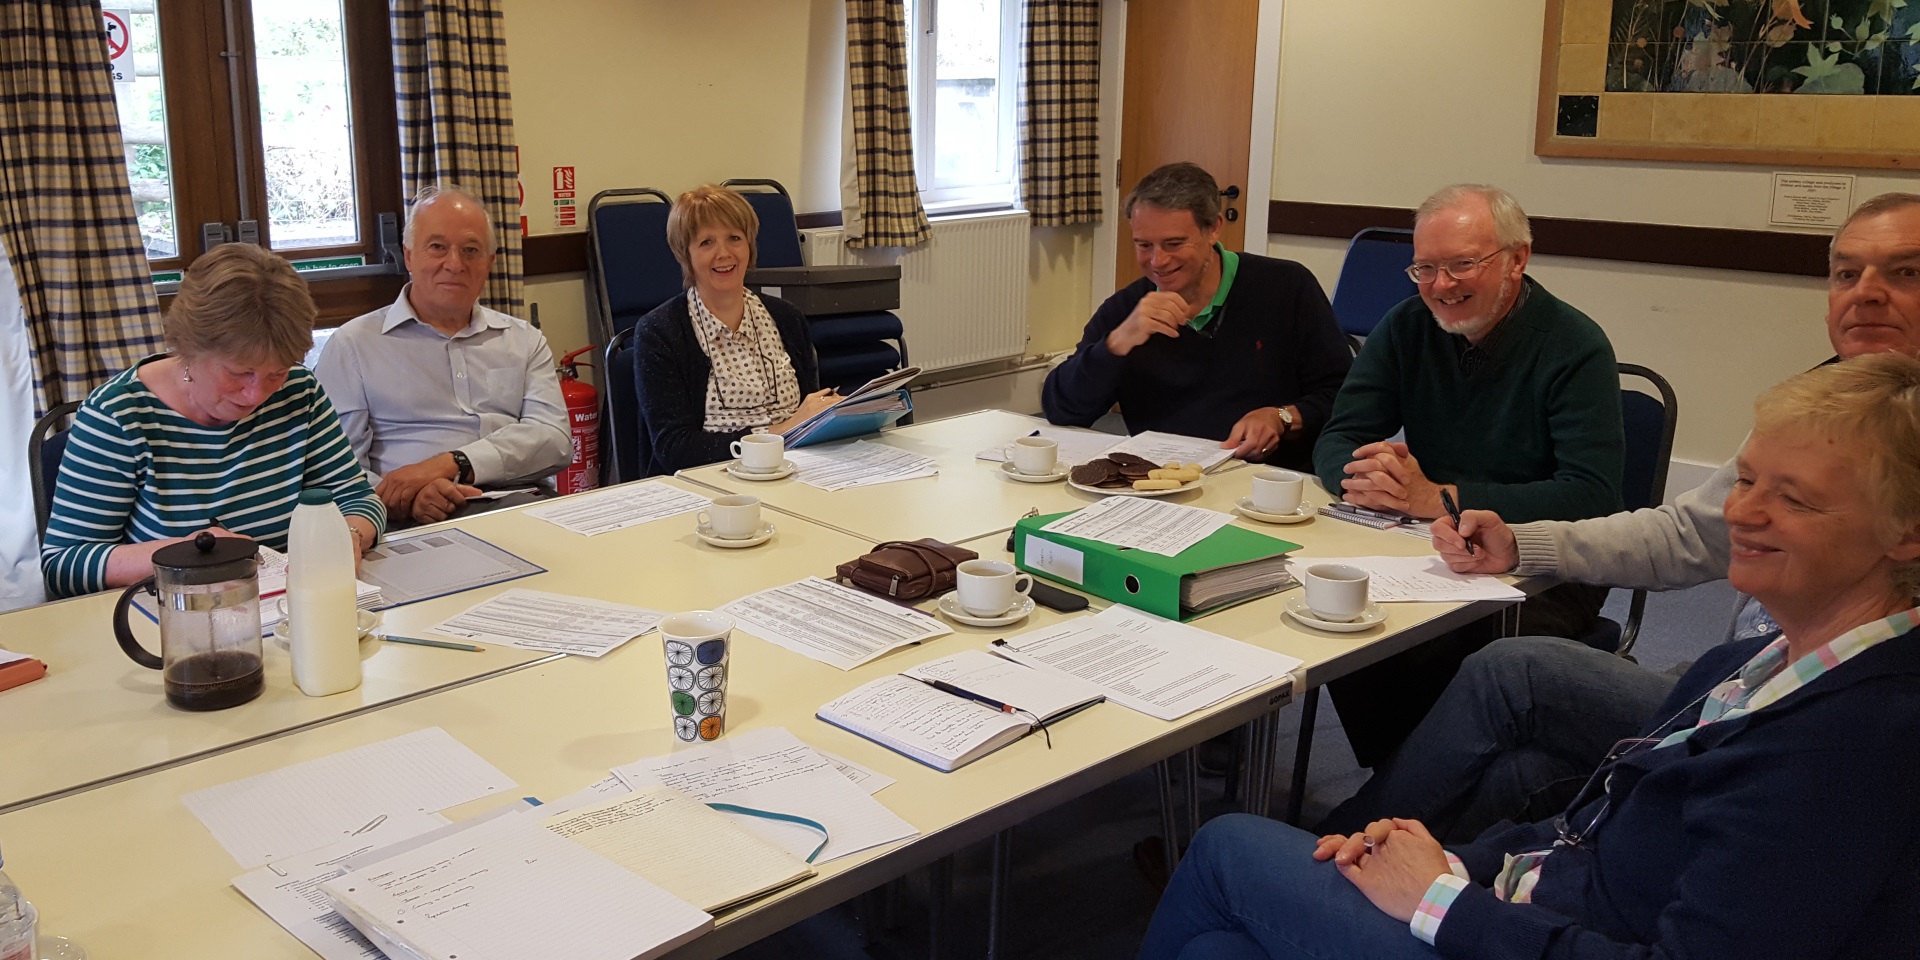 Volunteer researchers finding out about Victorian Dartmoor